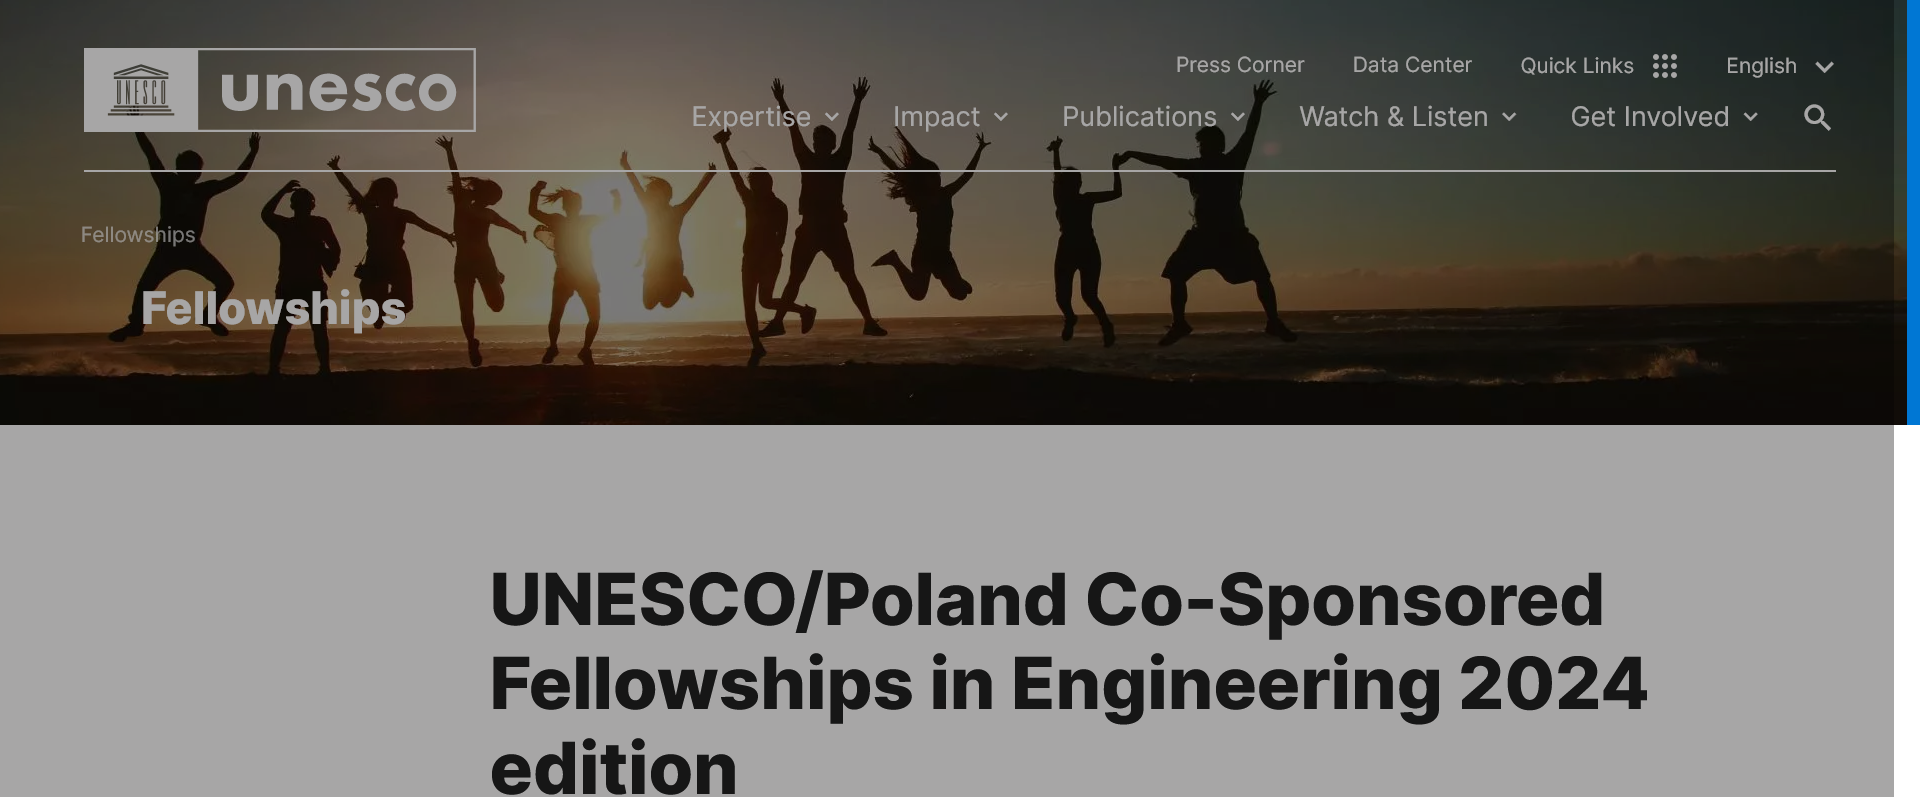 UNESCO/Poland Co-Sponsored Fellowship in Engineering for Developing Countries 2024